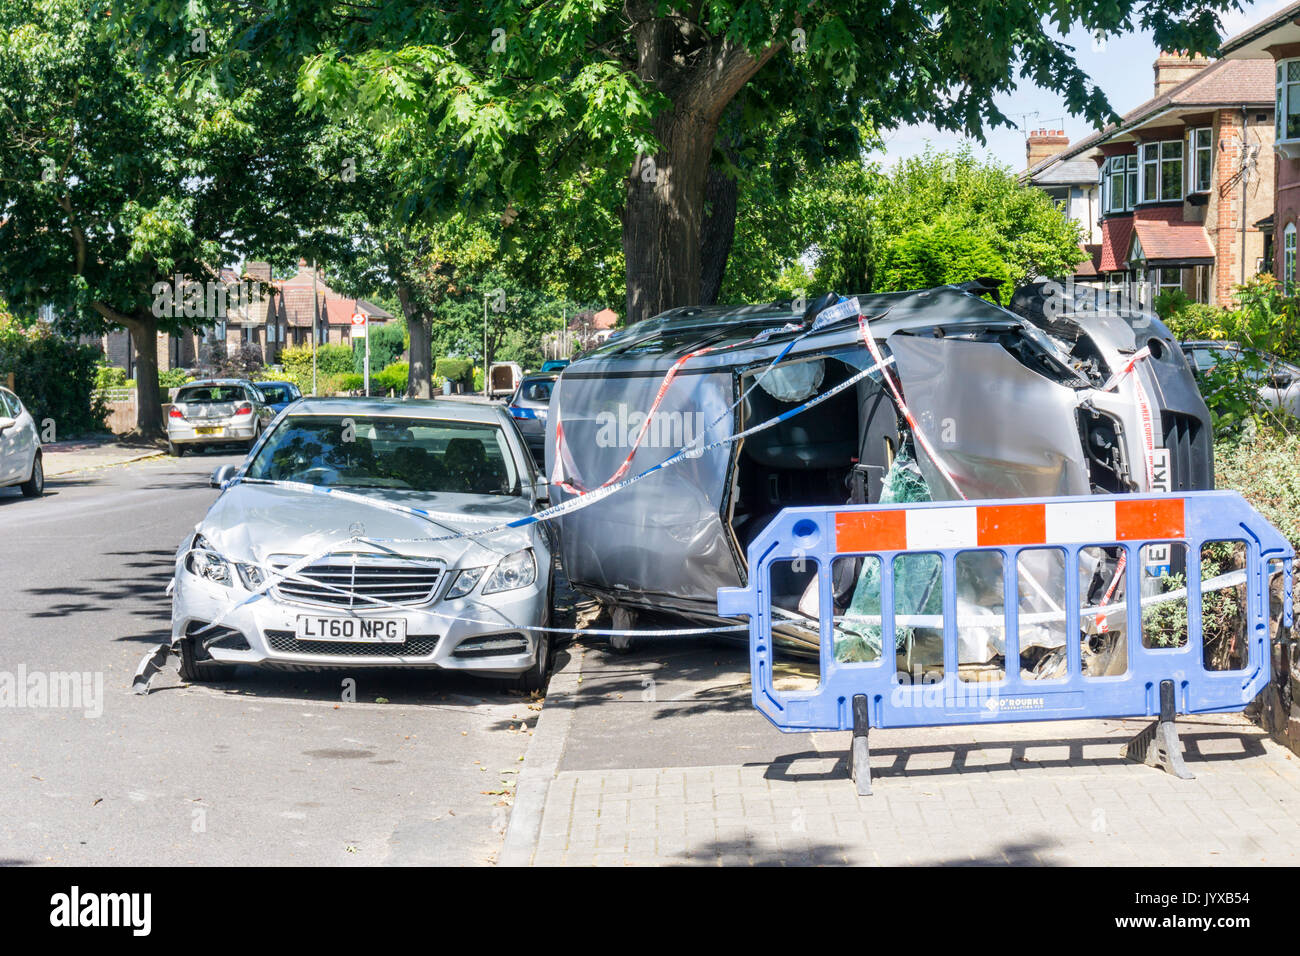 Result of traffic accident in suburban residential road.  Silver Nissan Qashqai Visia car overturned onto side on pavement & covered with police tape. Stock Photo